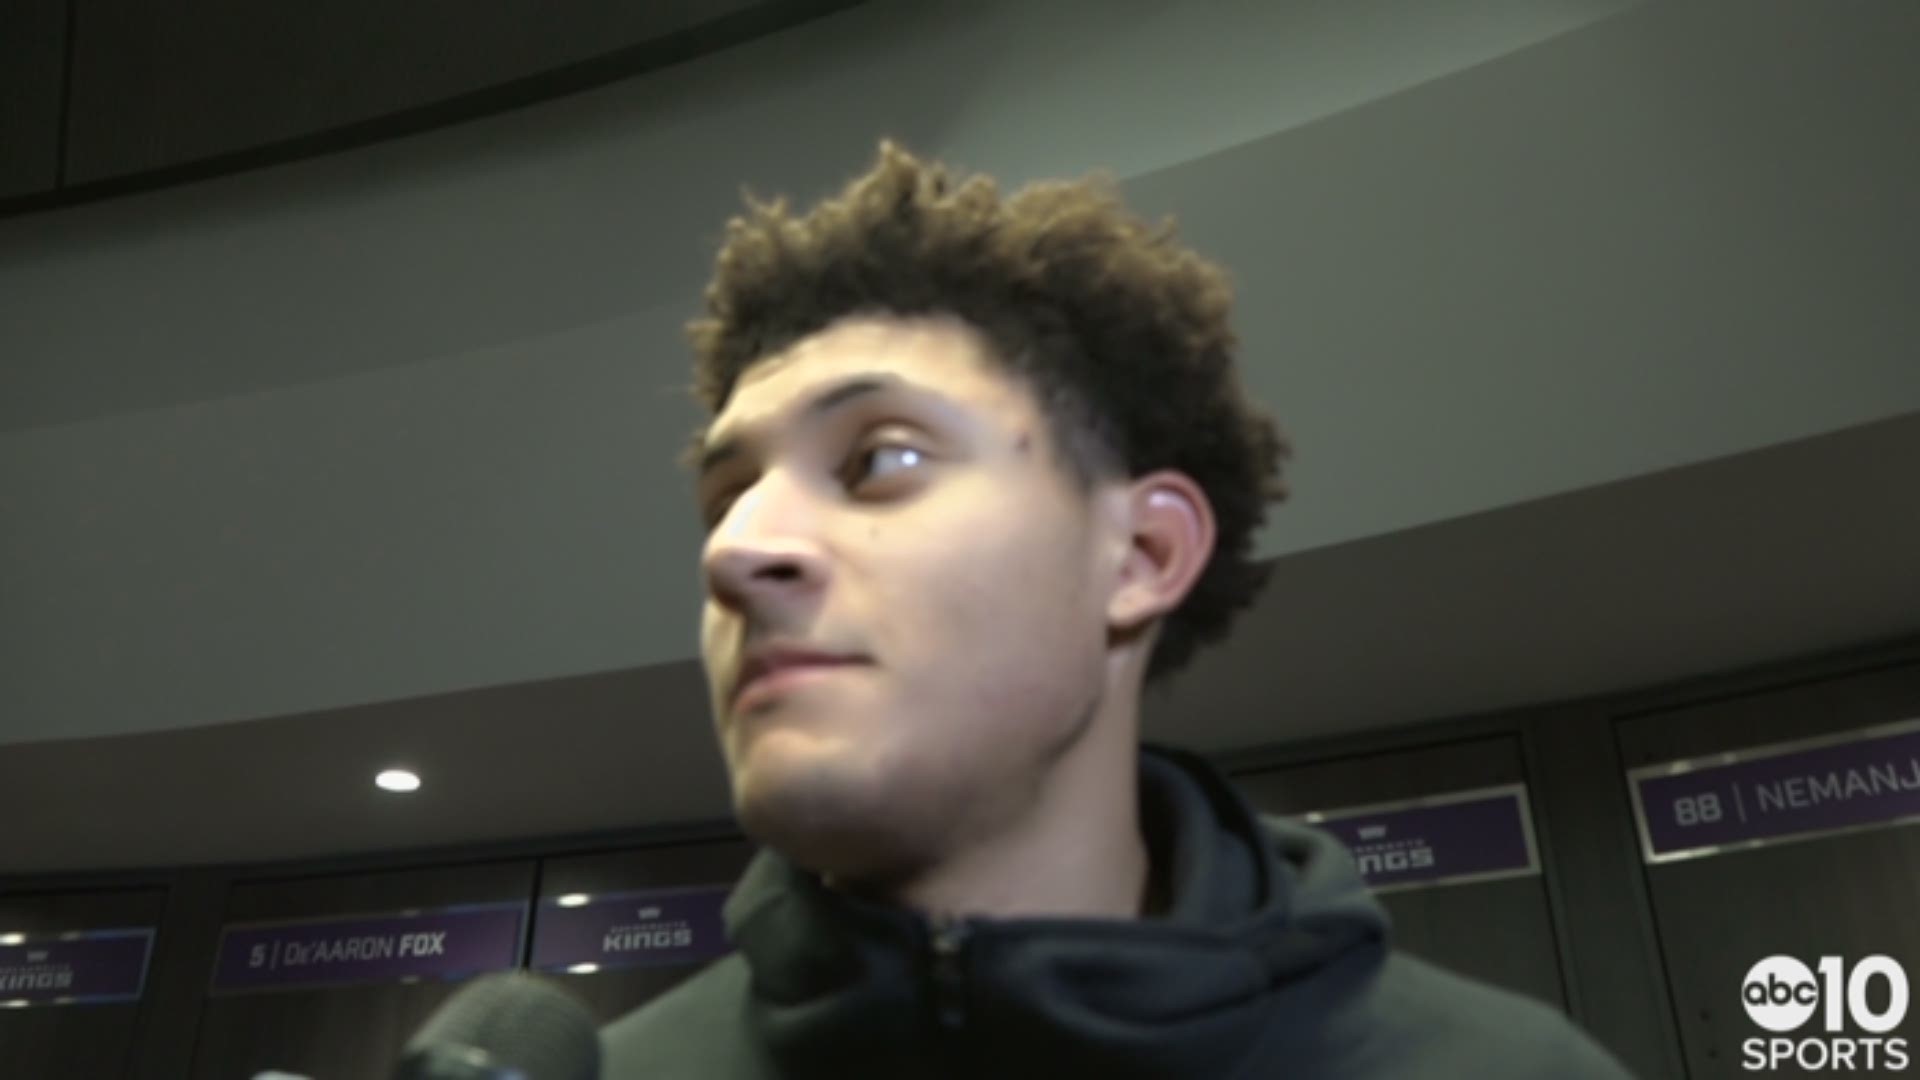 Kings forward Justin Jackson discusses his team's performance following Wednesday's season opening loss to the Utah Jazz, why he's pleased with the effort his team came out with and his comfort level while playing at the power forward position.